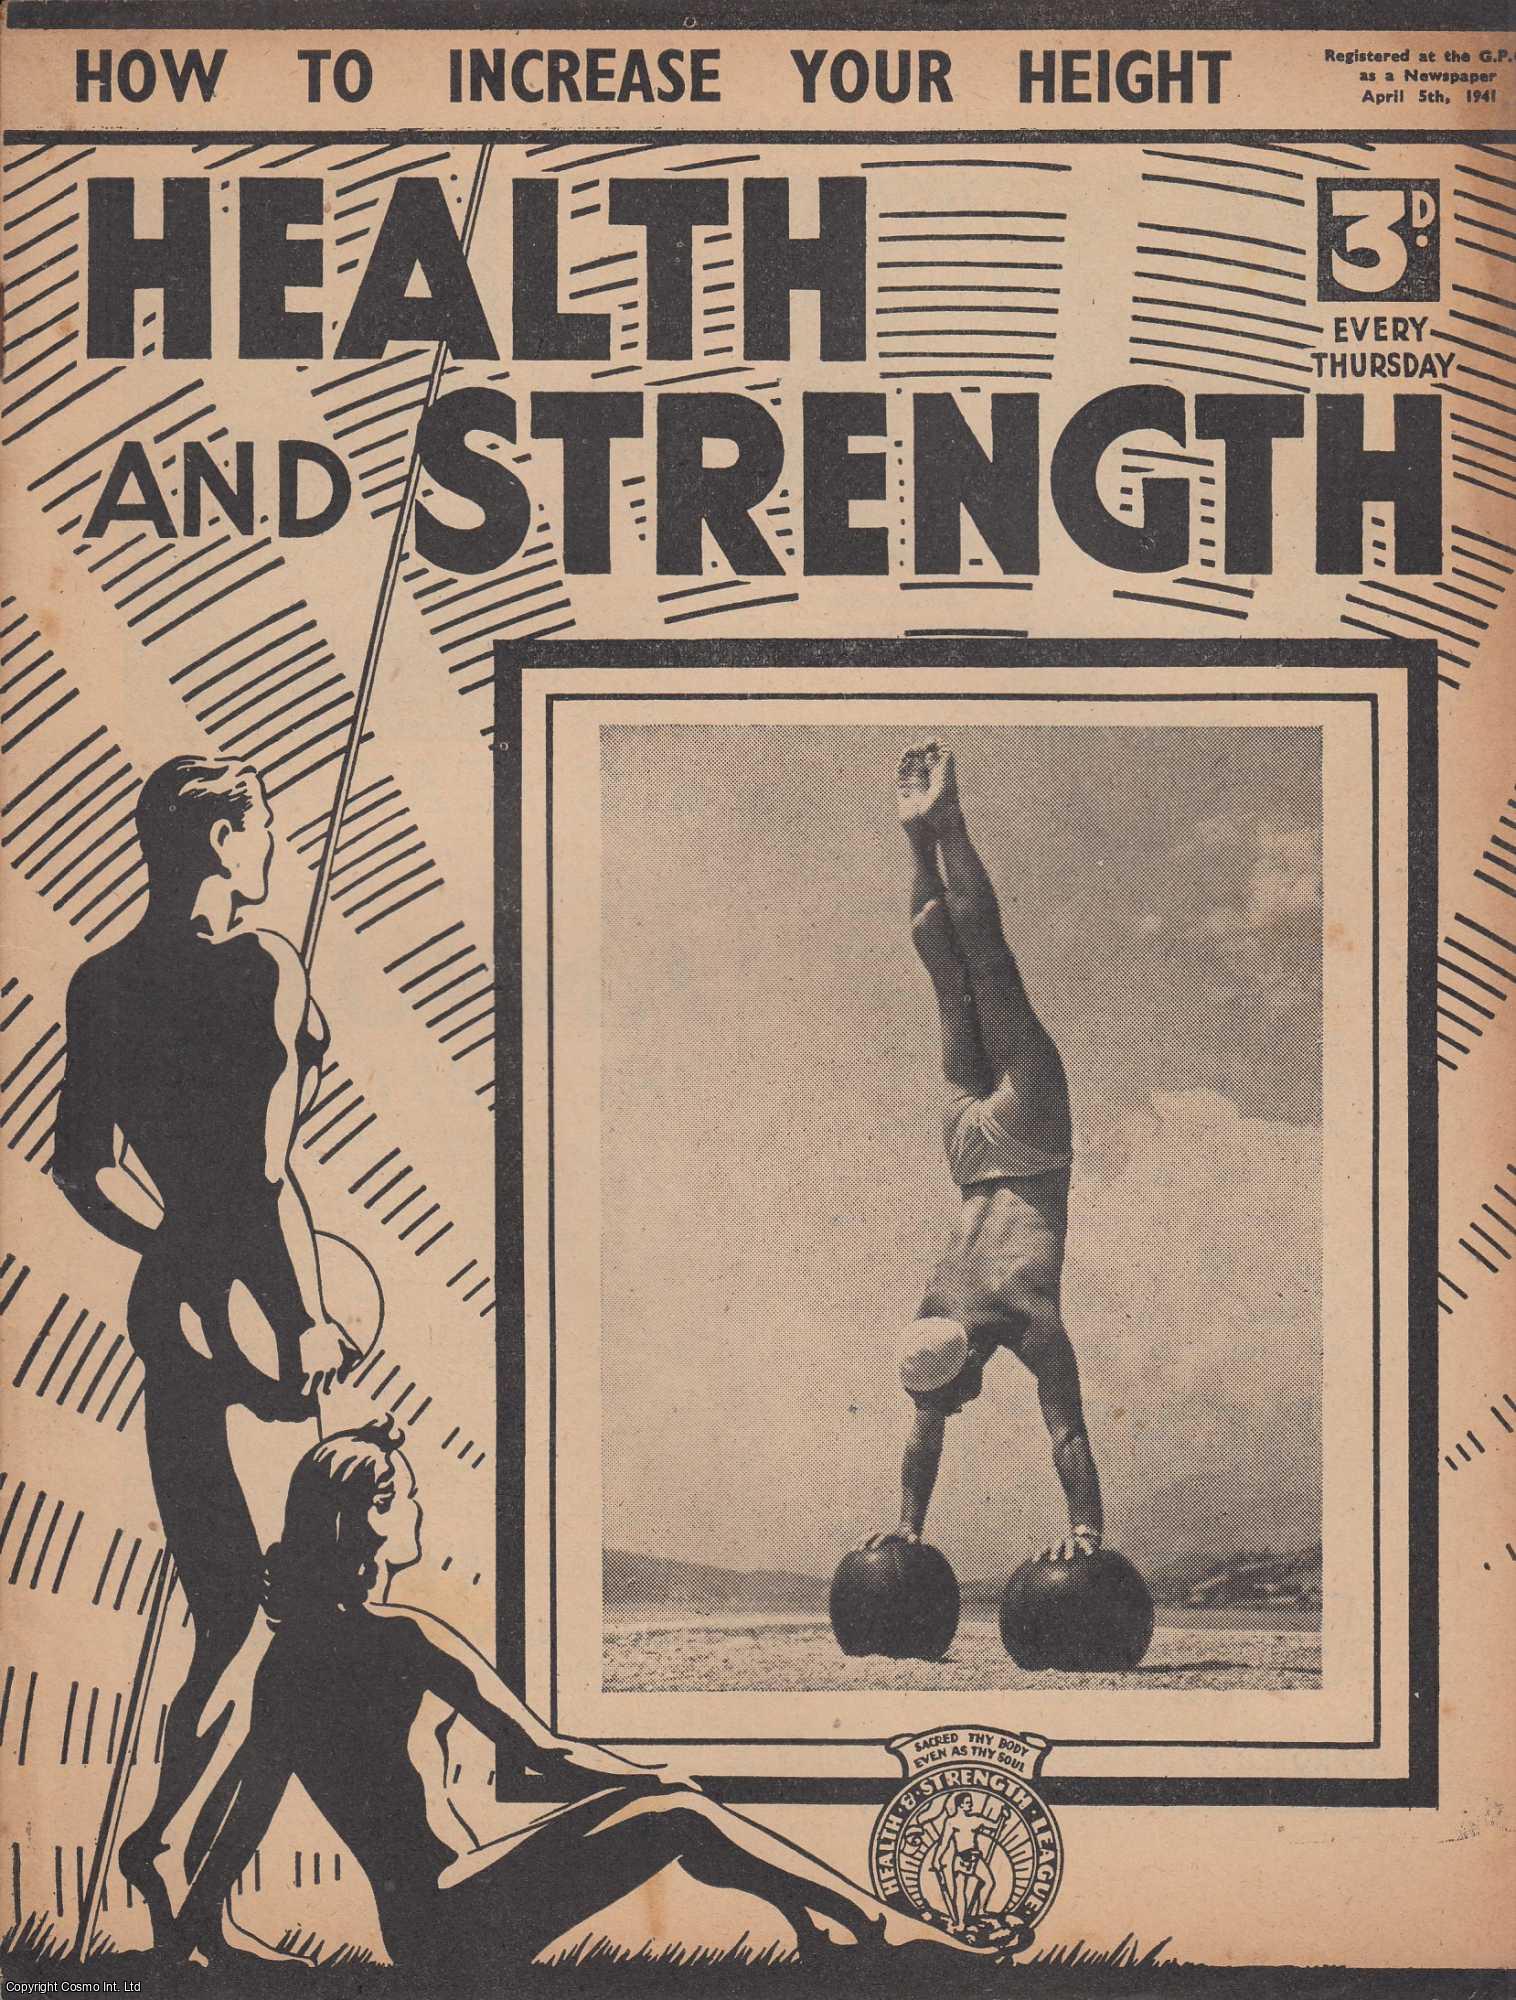 Body Building - How to Increase your Height. Health and Strength Magazine, April 5, 1941. Vol LXVIII, No 14.